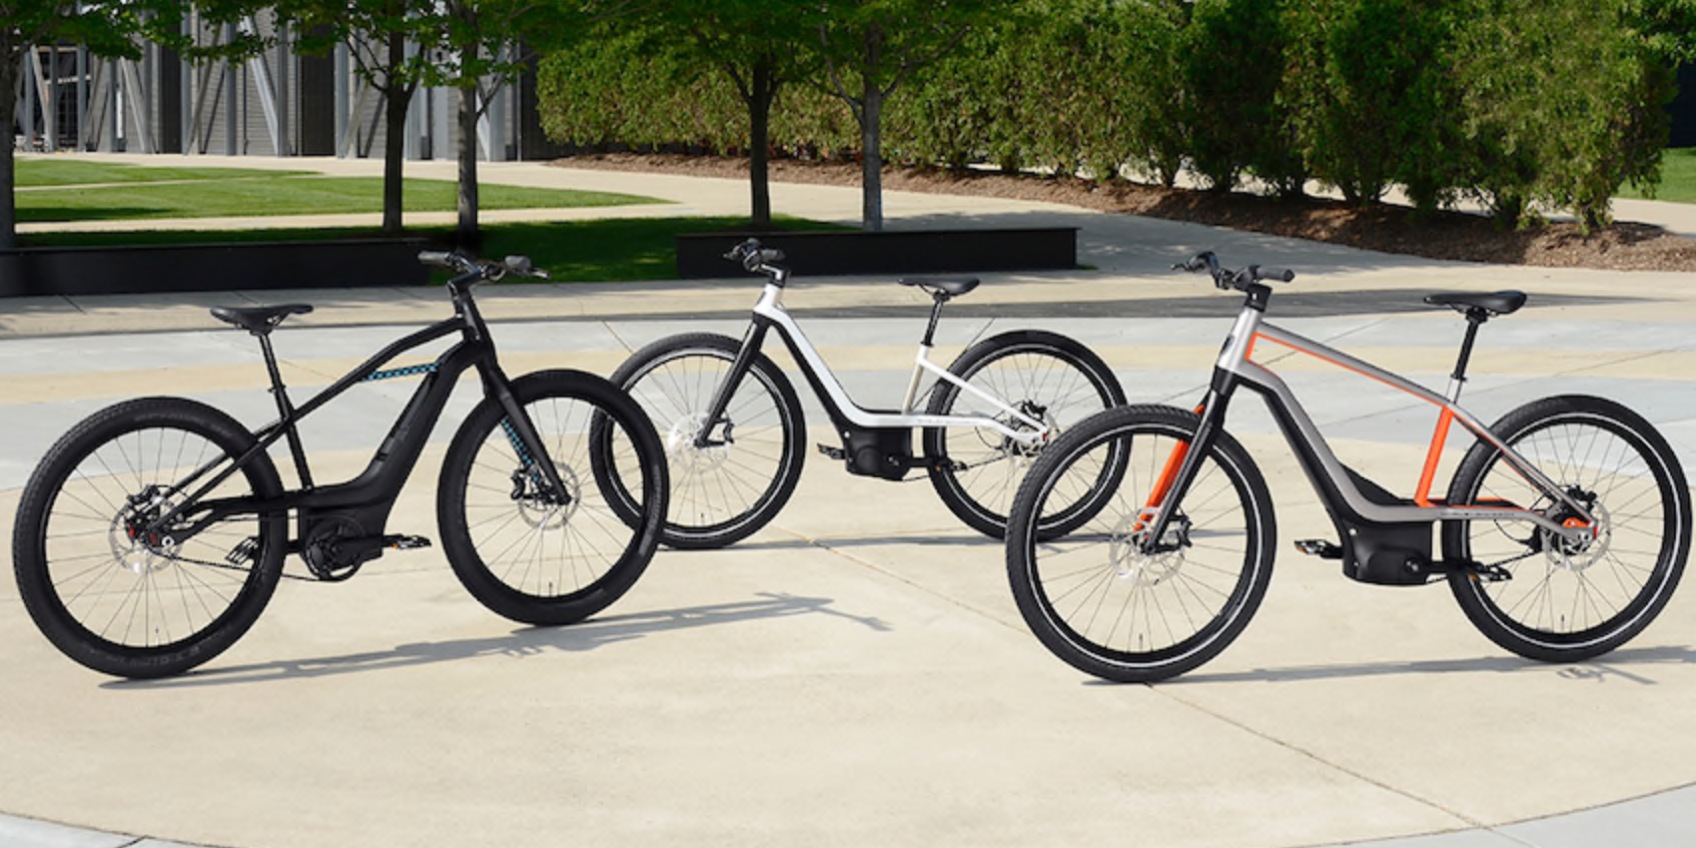 Harley Davidson Electric Bicycles Unveiled Showing Off Interesting Features